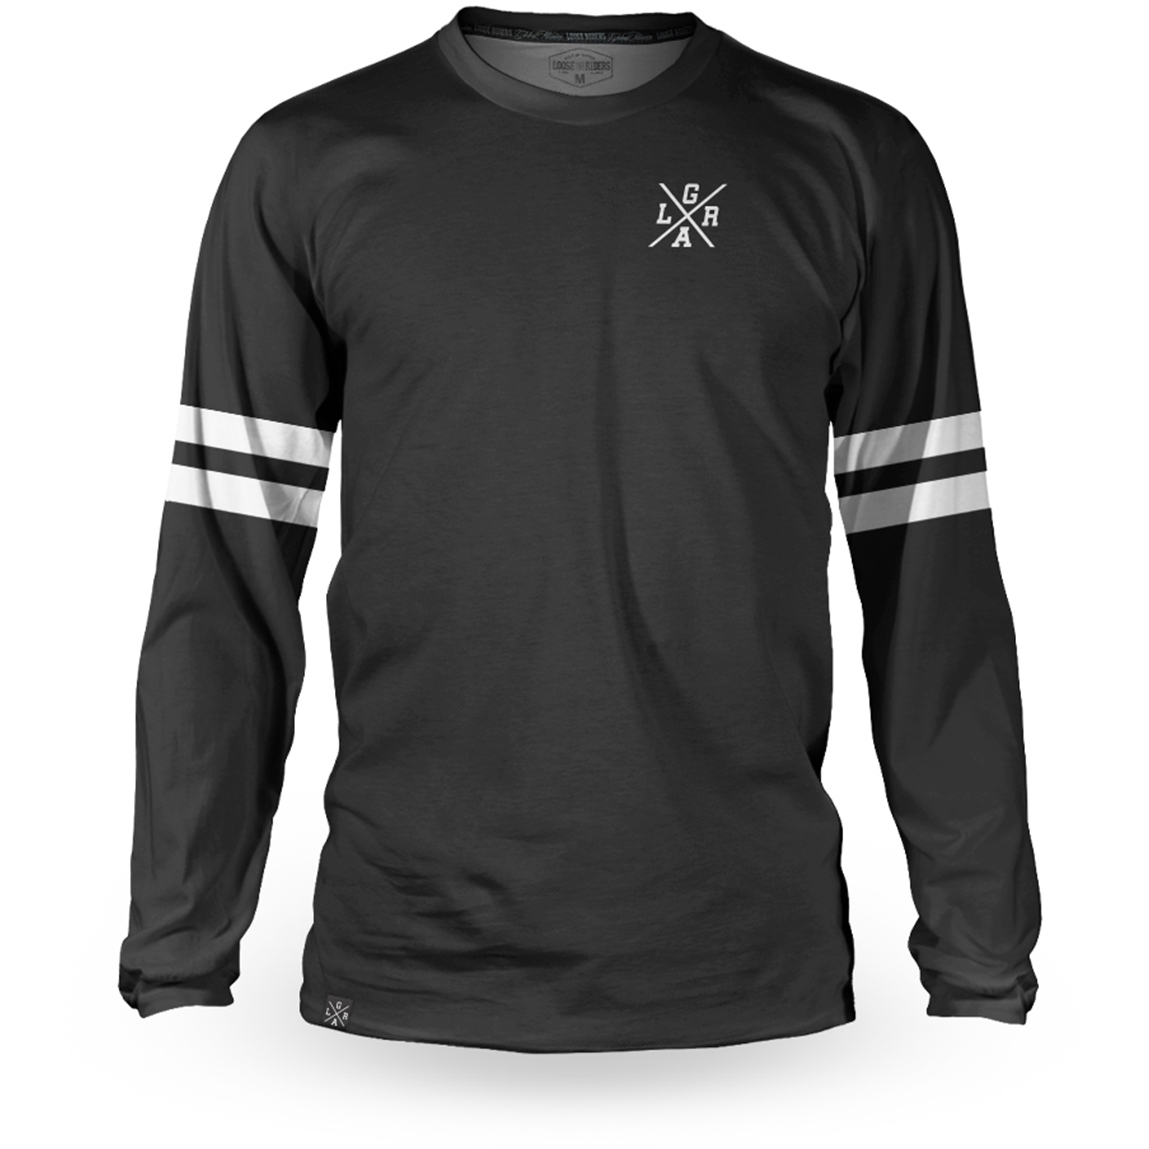 Image of Loose Riders Heritage Technical Long Sleeve Jersey - Black